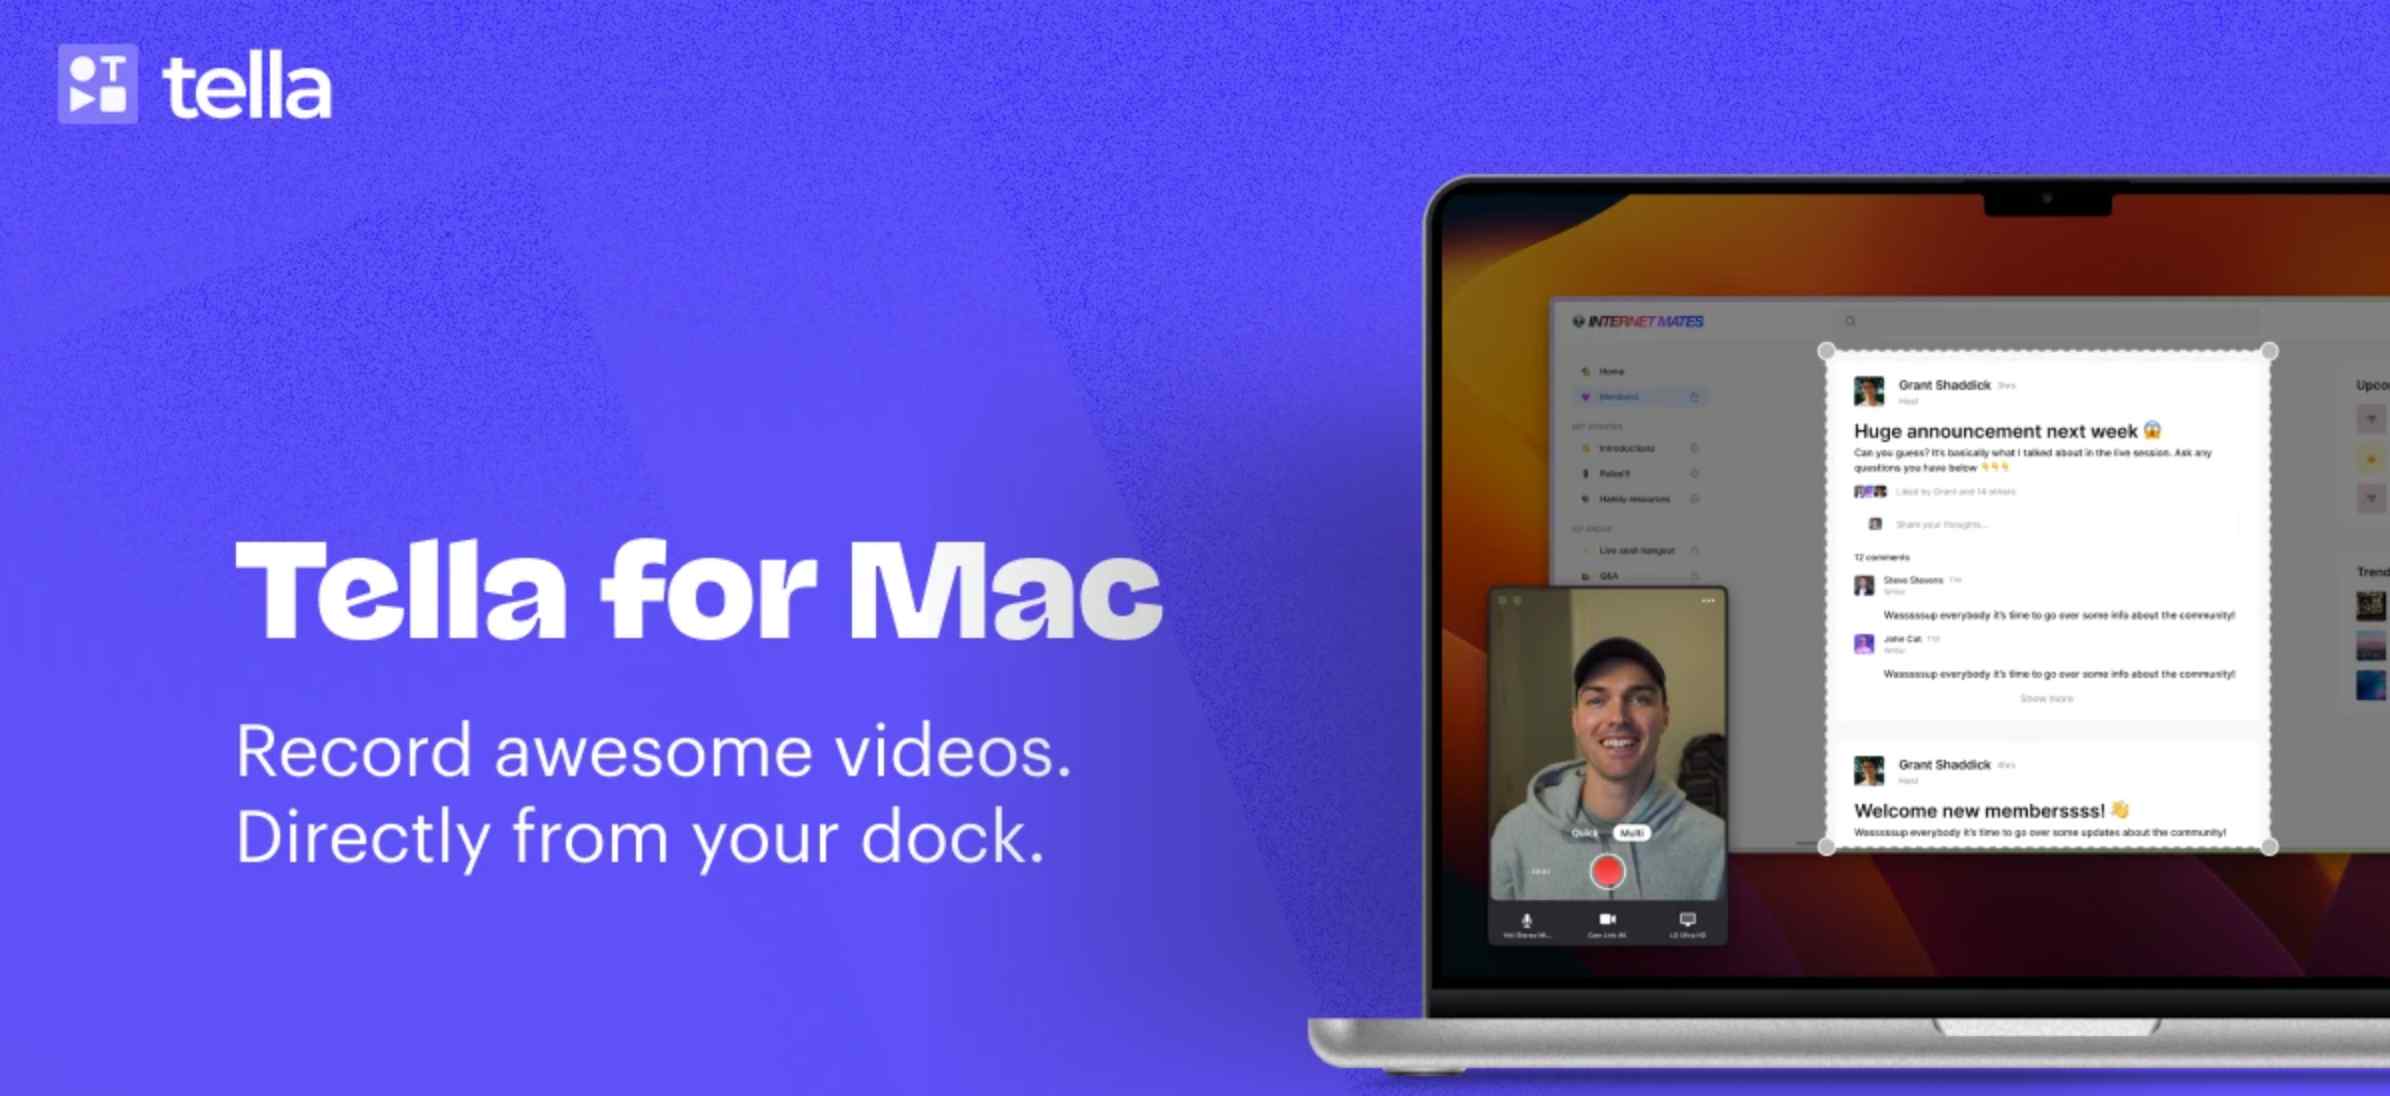 Tella is a powerful video-capturing tool for Mac users.